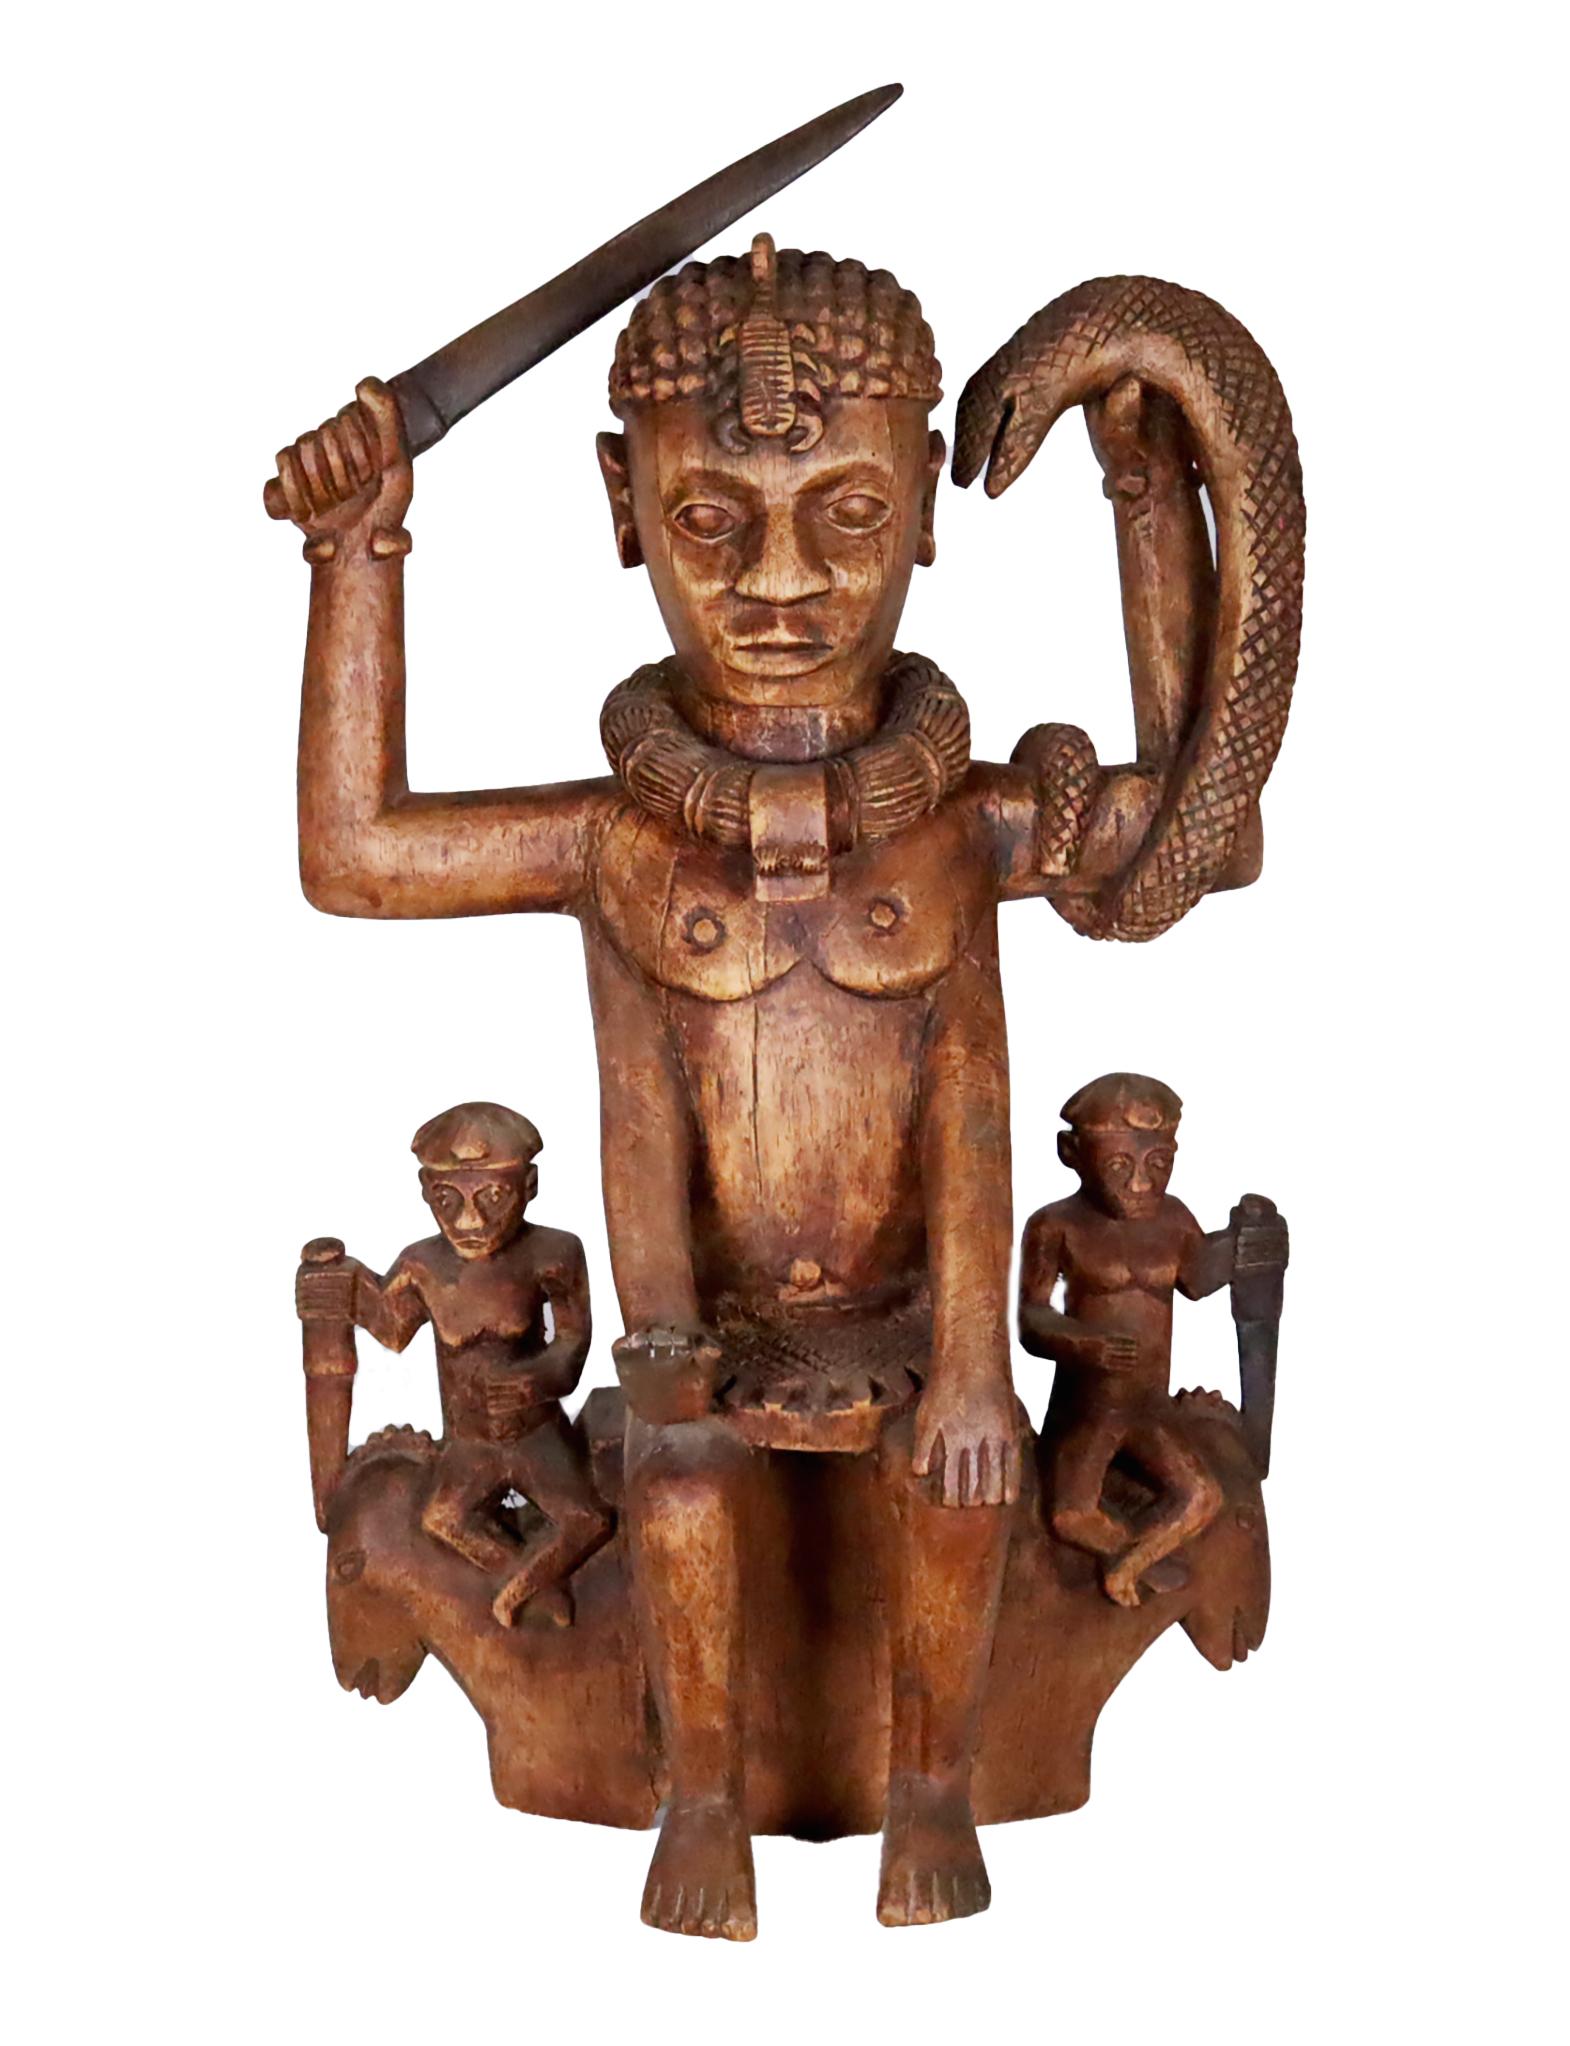 An unusual and rare androgynous type of the popular West African deity Mami Wata or possibly a type of the male version Papi Wata. The cult of Mami Wata extends from Senegal all the way into Angola and has many different names and expressions. Like